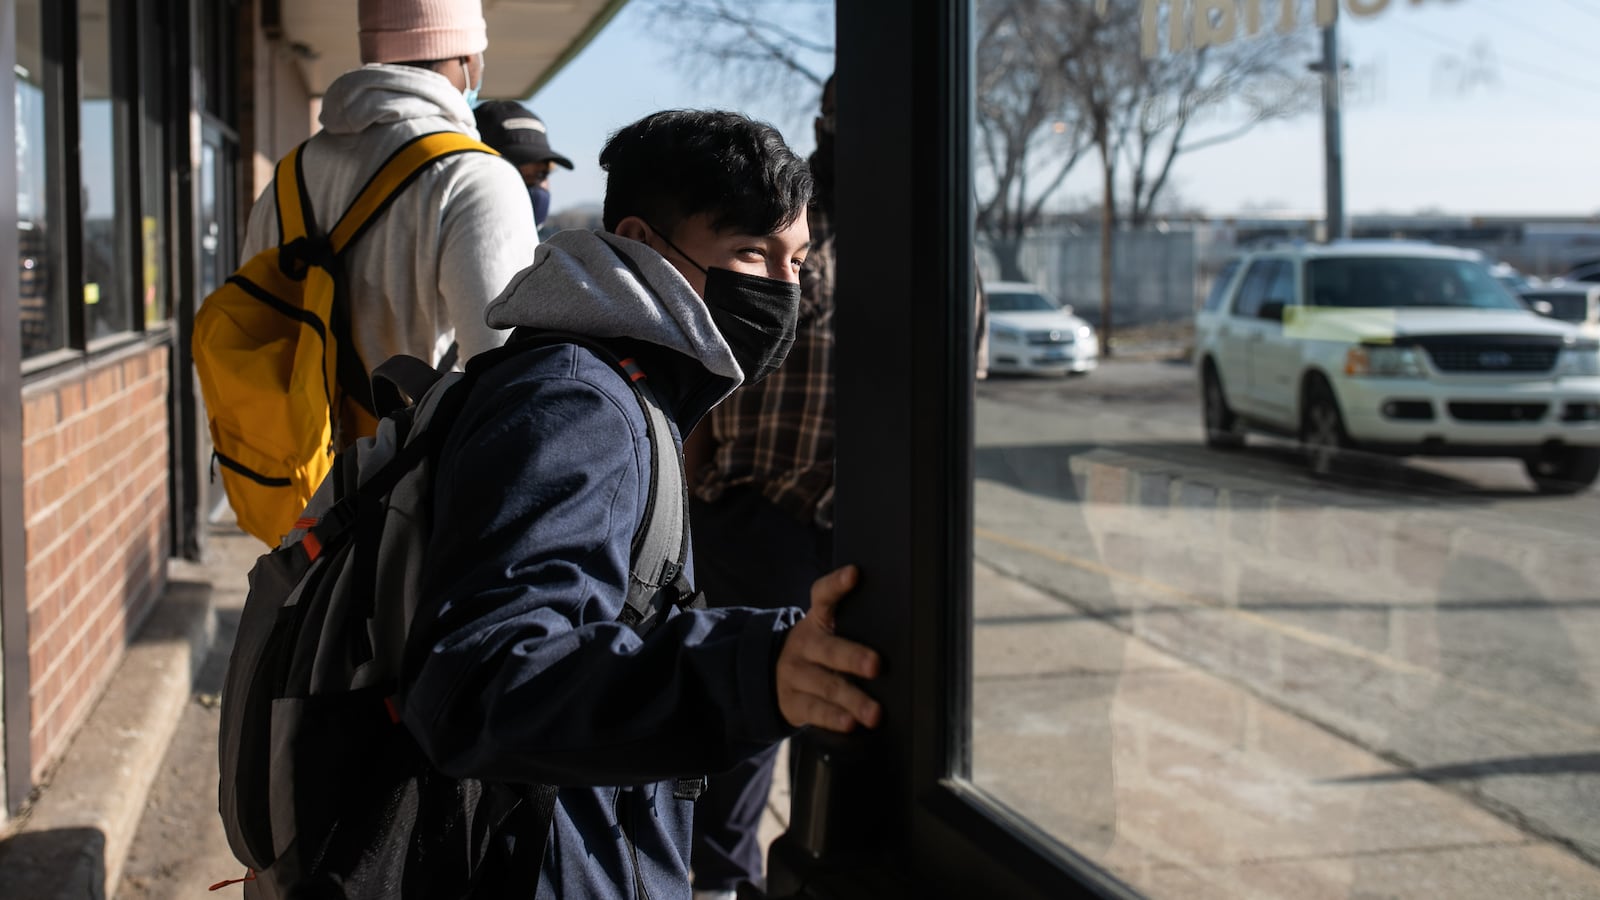 A student, wearing a black mask, blue jacket, and grey hoodie, holds a door open as he exits school. Other students are on the sidewalk directly behind him.